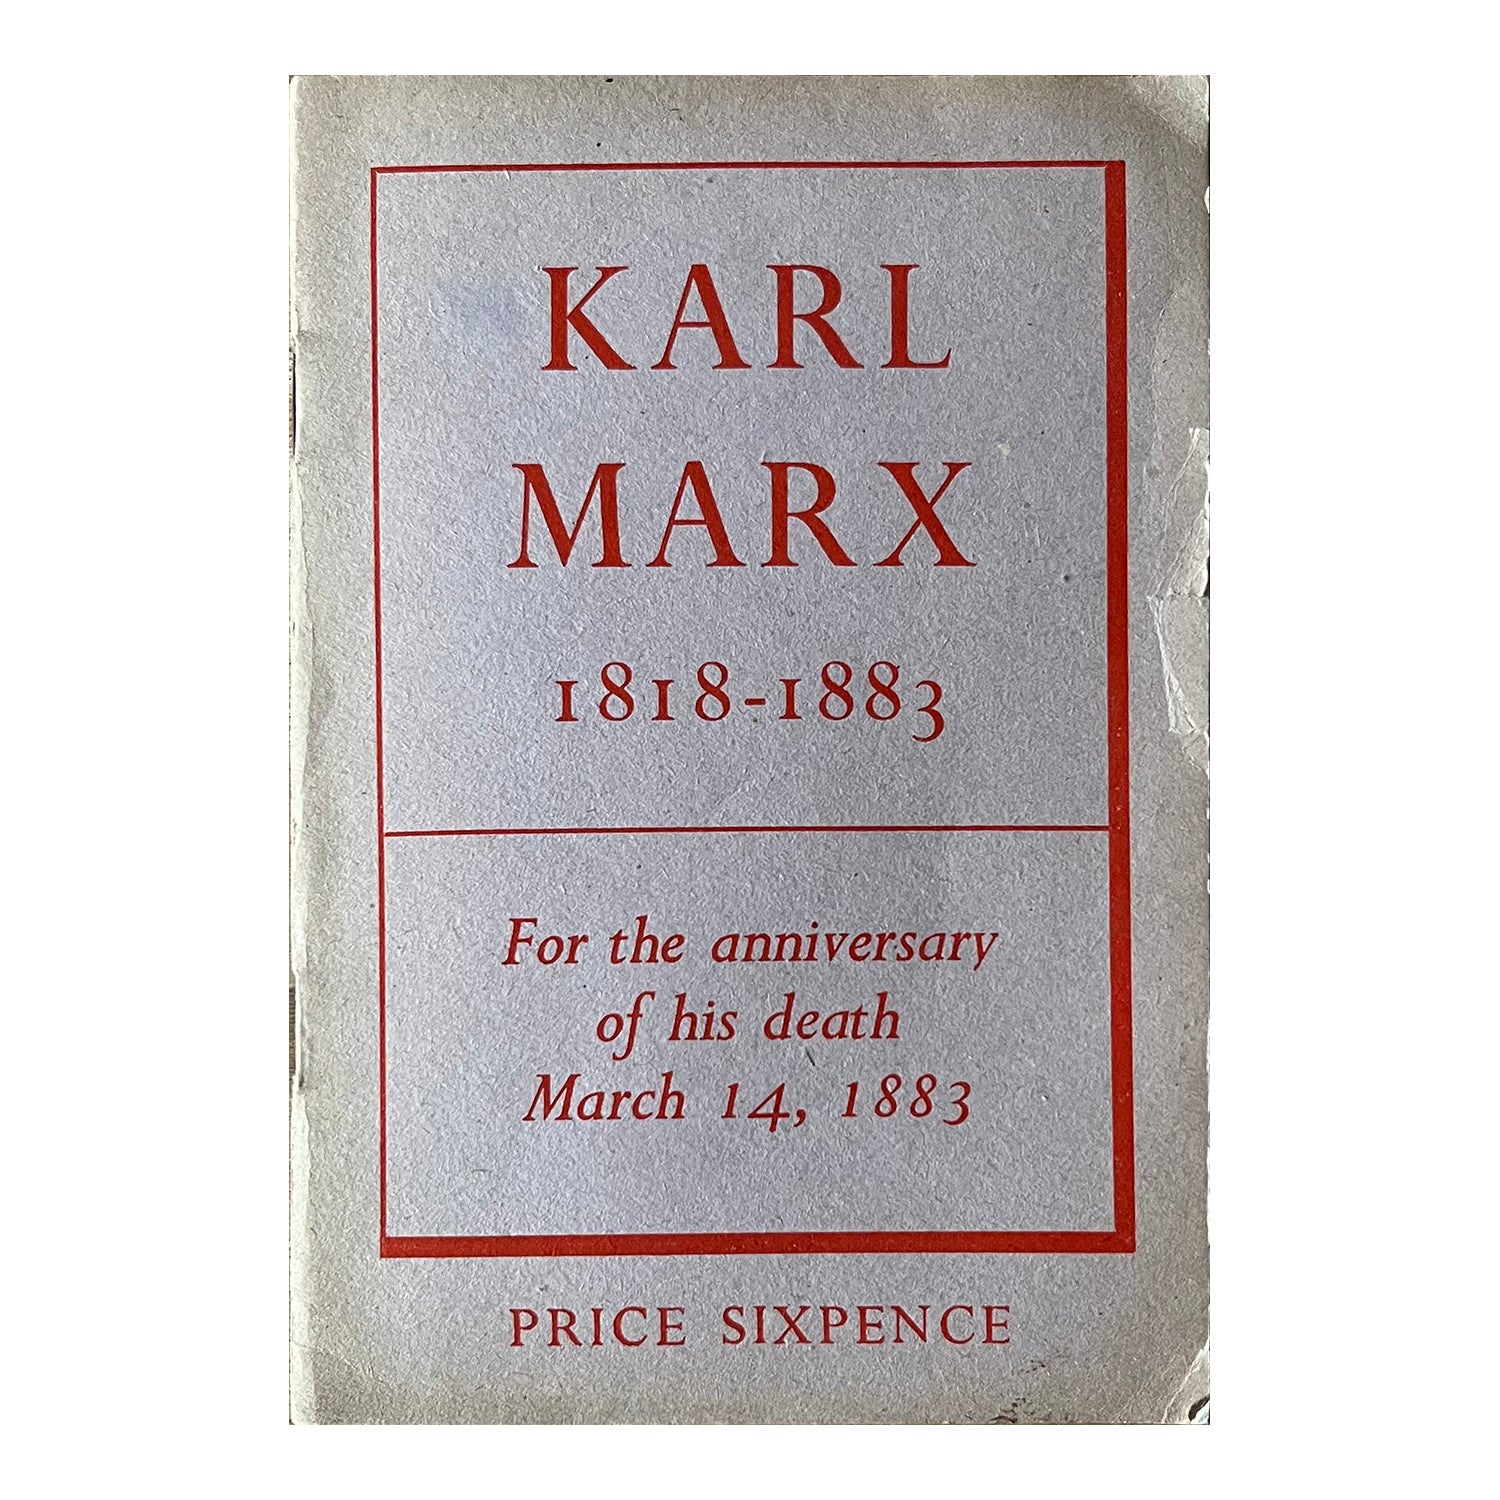 Karl Marx 1818-1883, published by Lawrence & Wishart publishing company and printed by the Curwen Press in 1943 to mark the anniversary of Marx’s death (14 March 1883). The 30-page pamphlet contains extracts from Marx’s speeches and writings